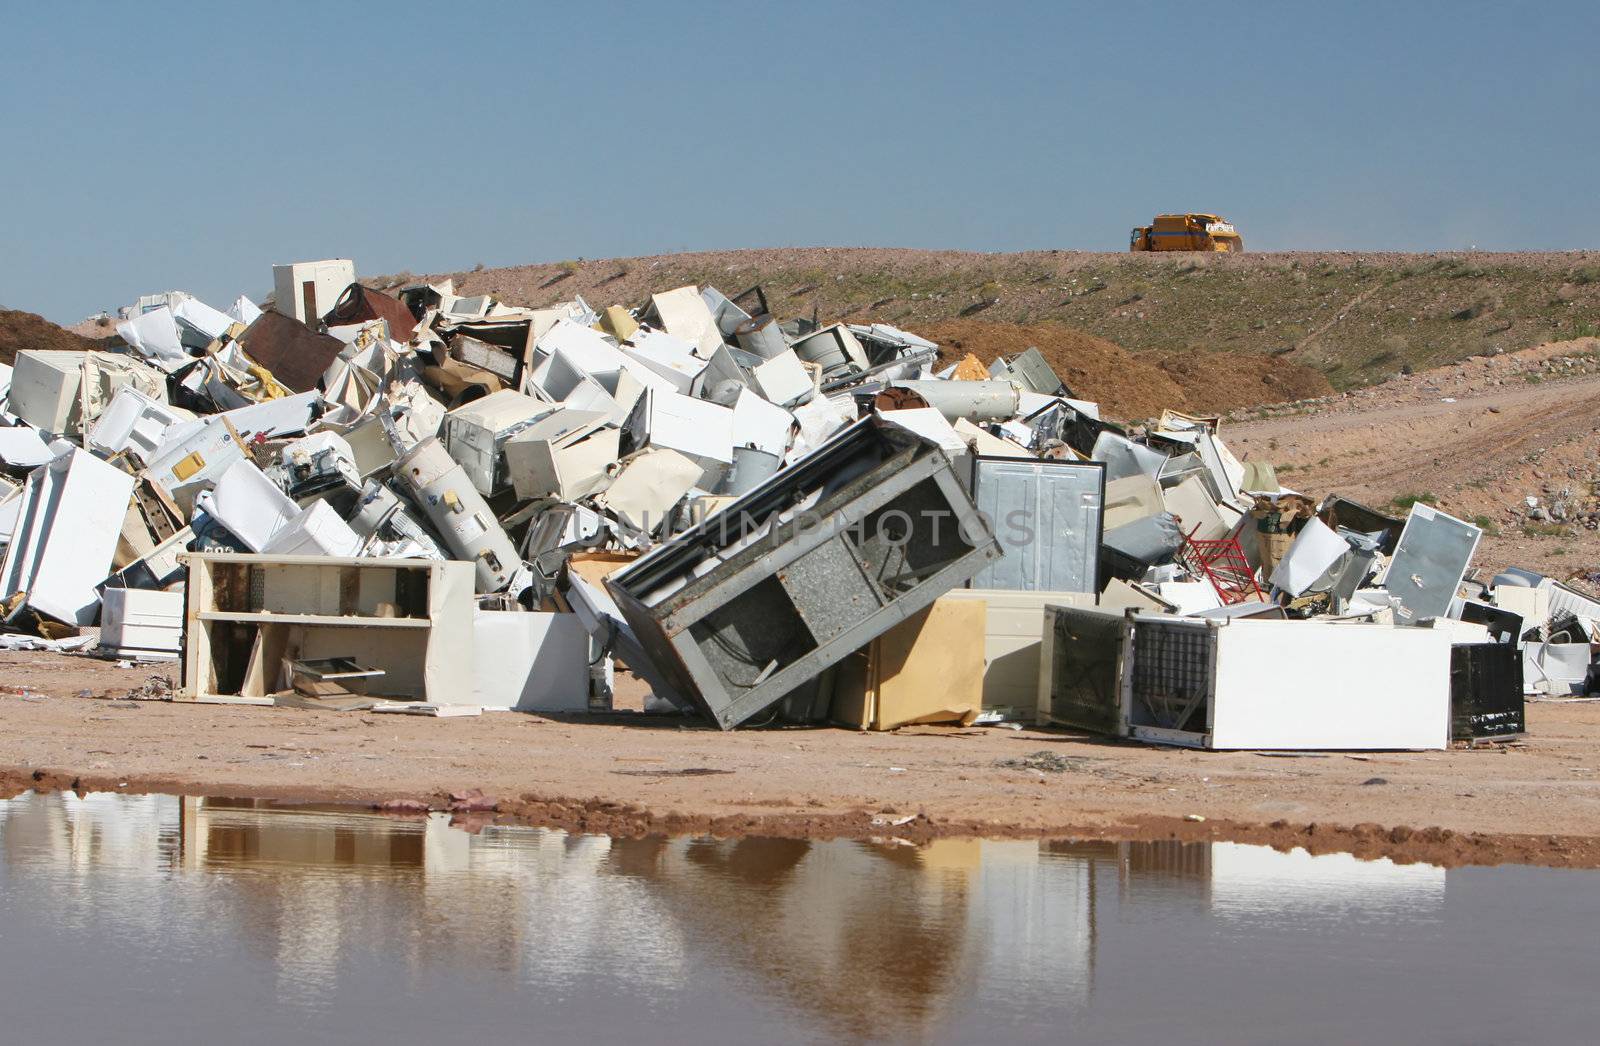 A pile of water heaters, air conditions, and other appliances at a waste dump. A large puddle reflects the image